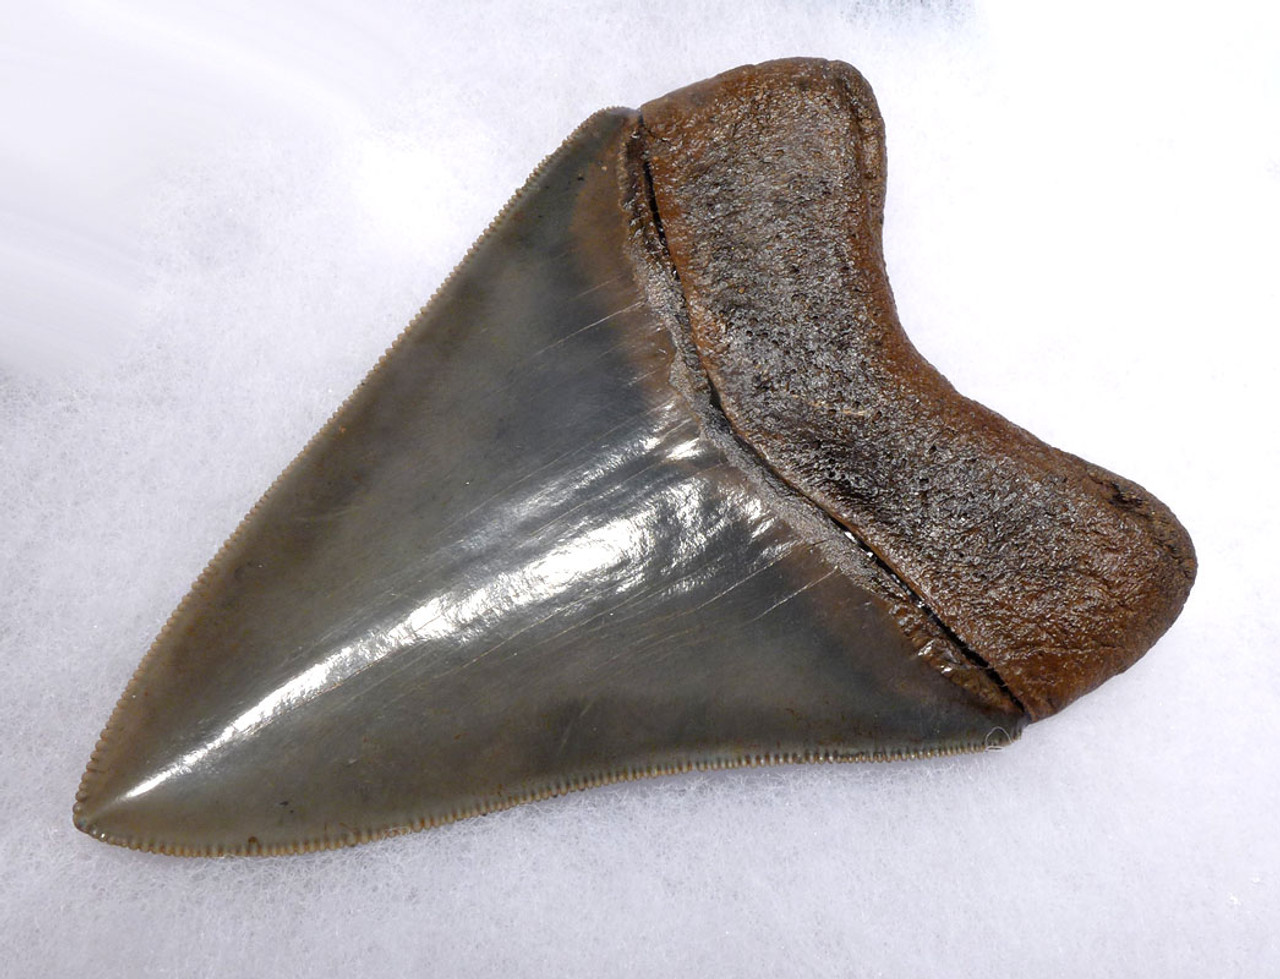 SH6-387 - COLLECTOR GRADE 4.25 INCH MEGALODON SHARK TOOTH WITH CHATOYANT SILVER ENAMEL